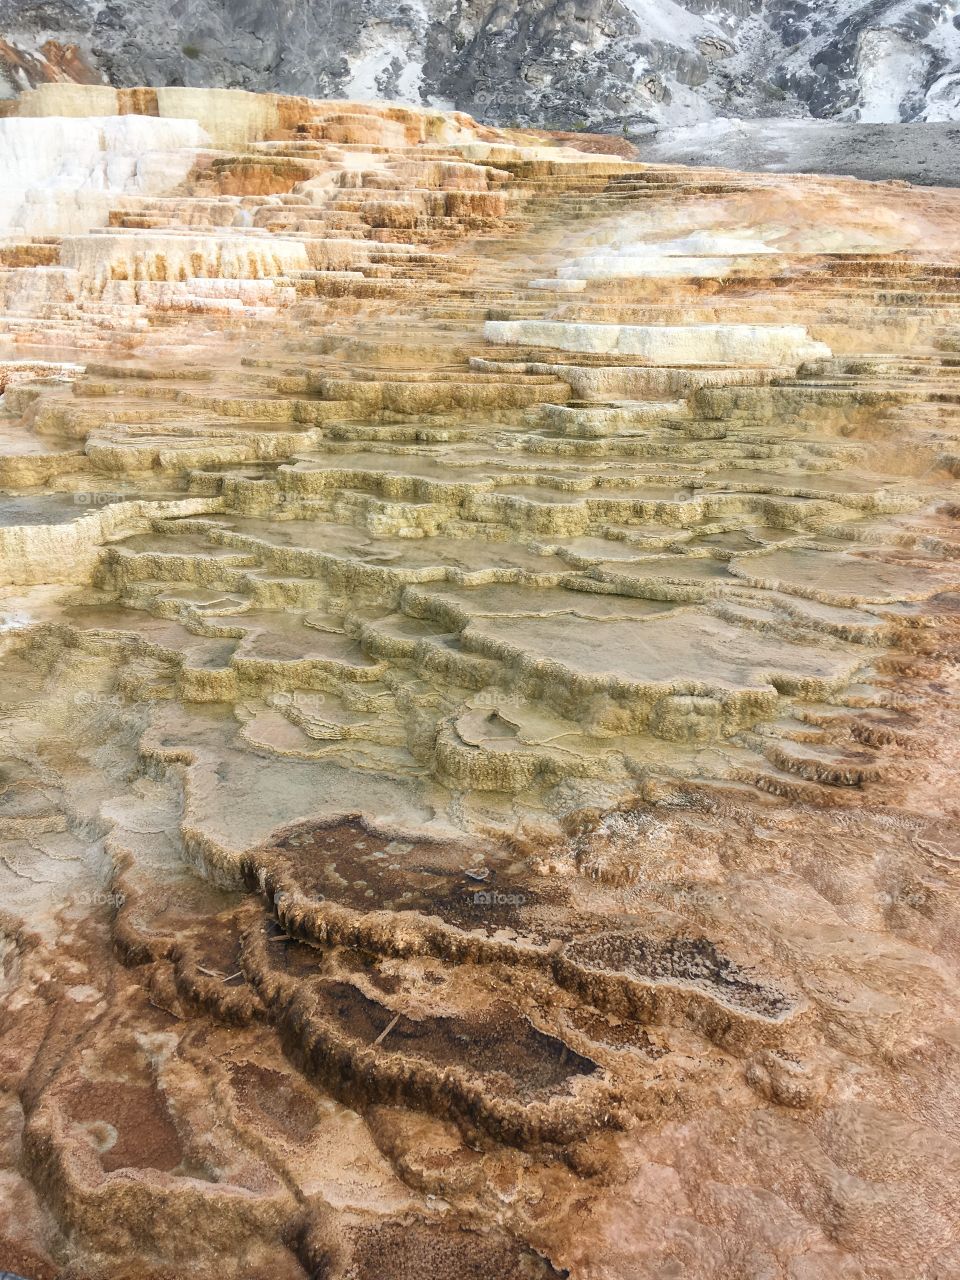 Travertine terraces of Mammoth hot springs, Yellowstone National Park, USA